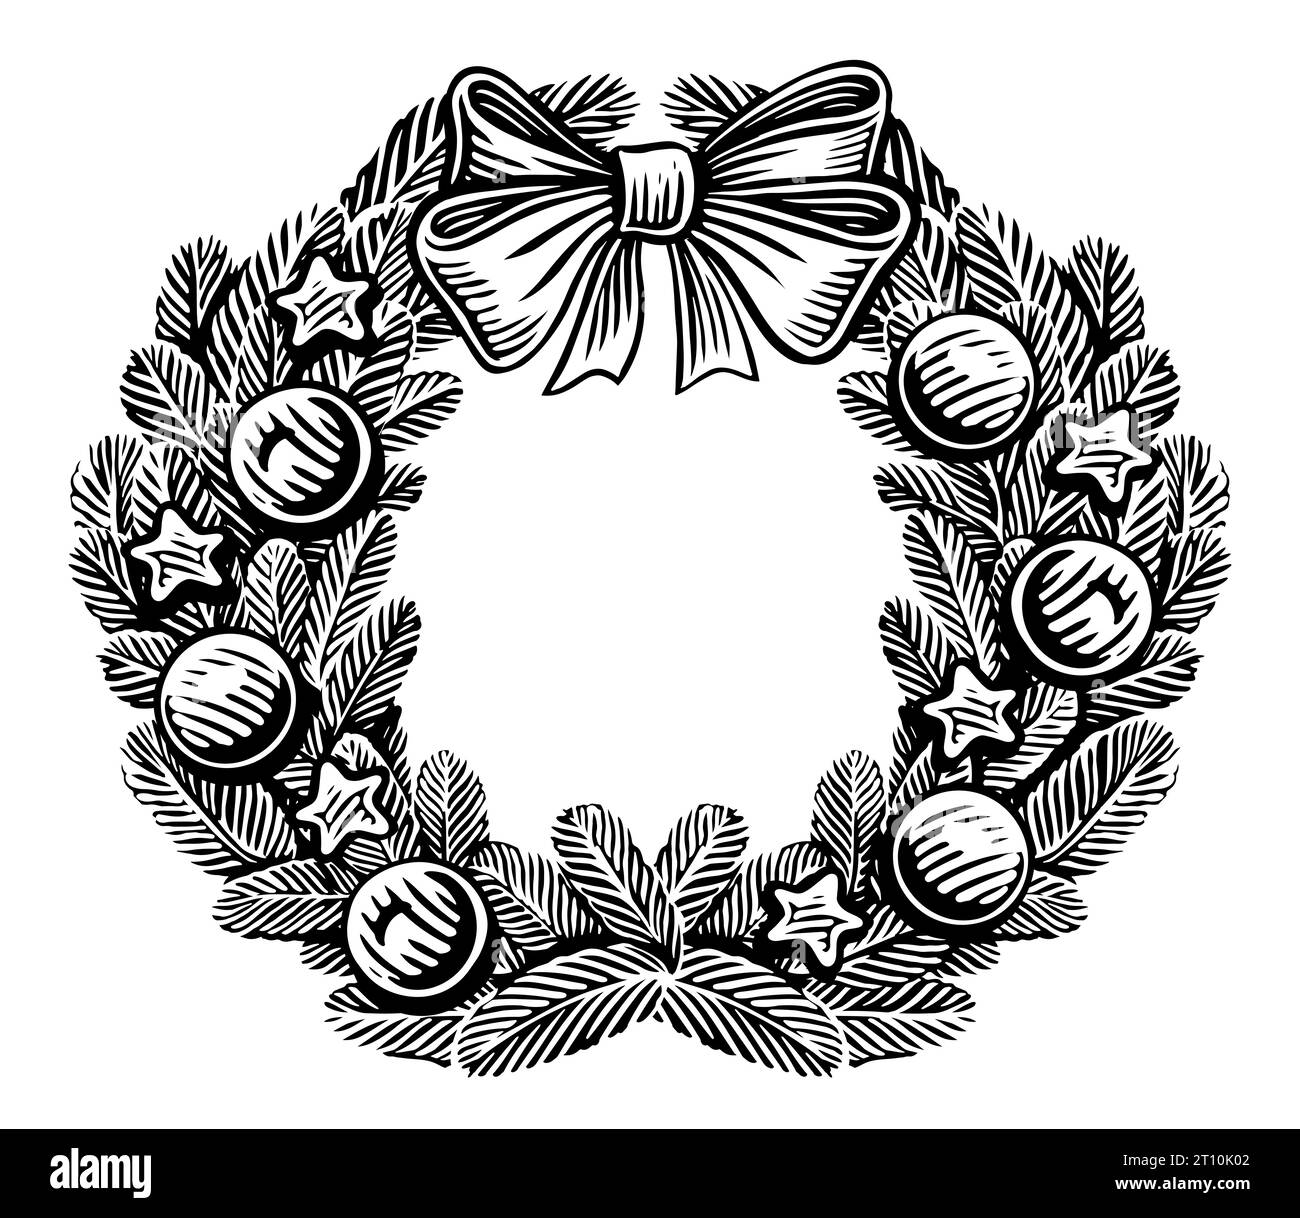 Christmas wreath of fir branches, decorated with a satin bow and decorative balls. Vintage sketch illustration Stock Photo